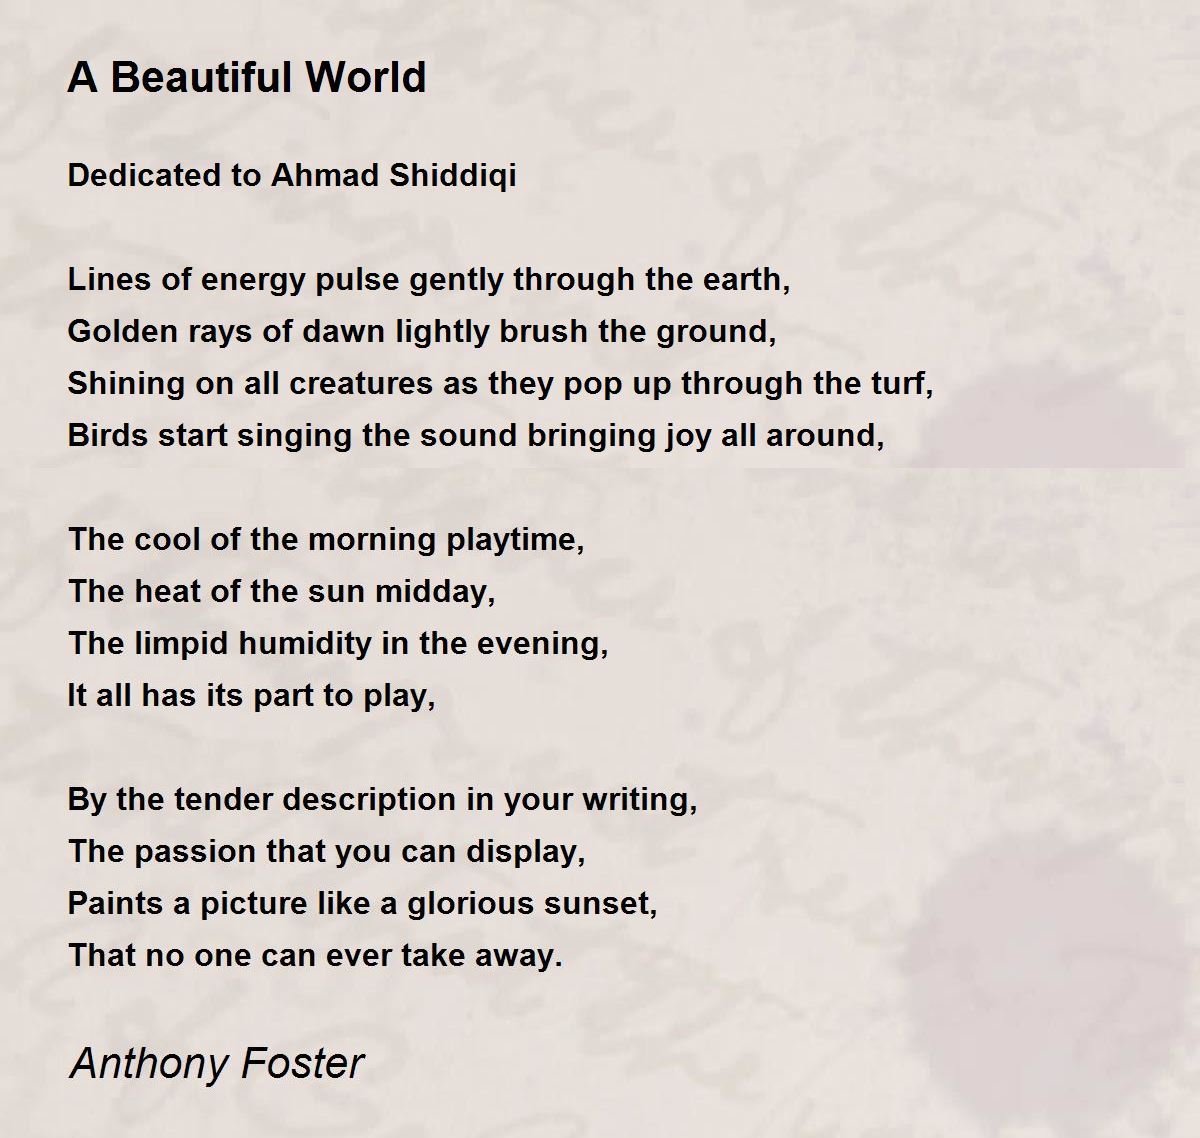 A Beautiful World - A Beautiful World Poem by Anthony Foster